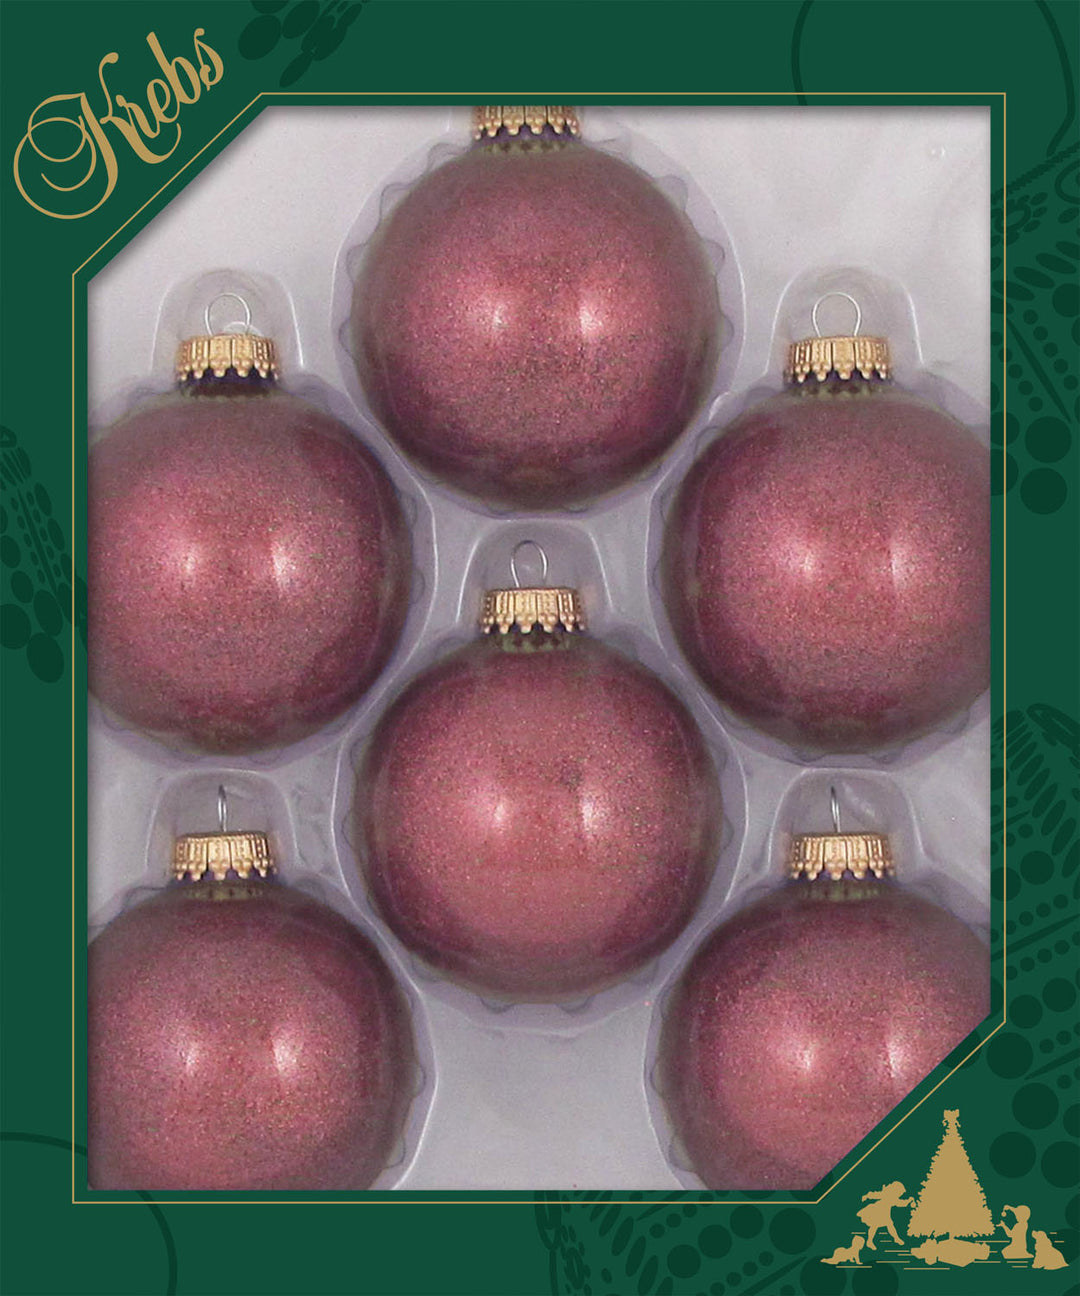 Christmas Tree Ornaments - 67mm / 2.625" [6 Pieces] Designer Glass Baubles from Christmas By Krebs - Handcrafted Seamless Hanging Holiday Decor for Trees (Cranberry Merlot Red Sparkle)